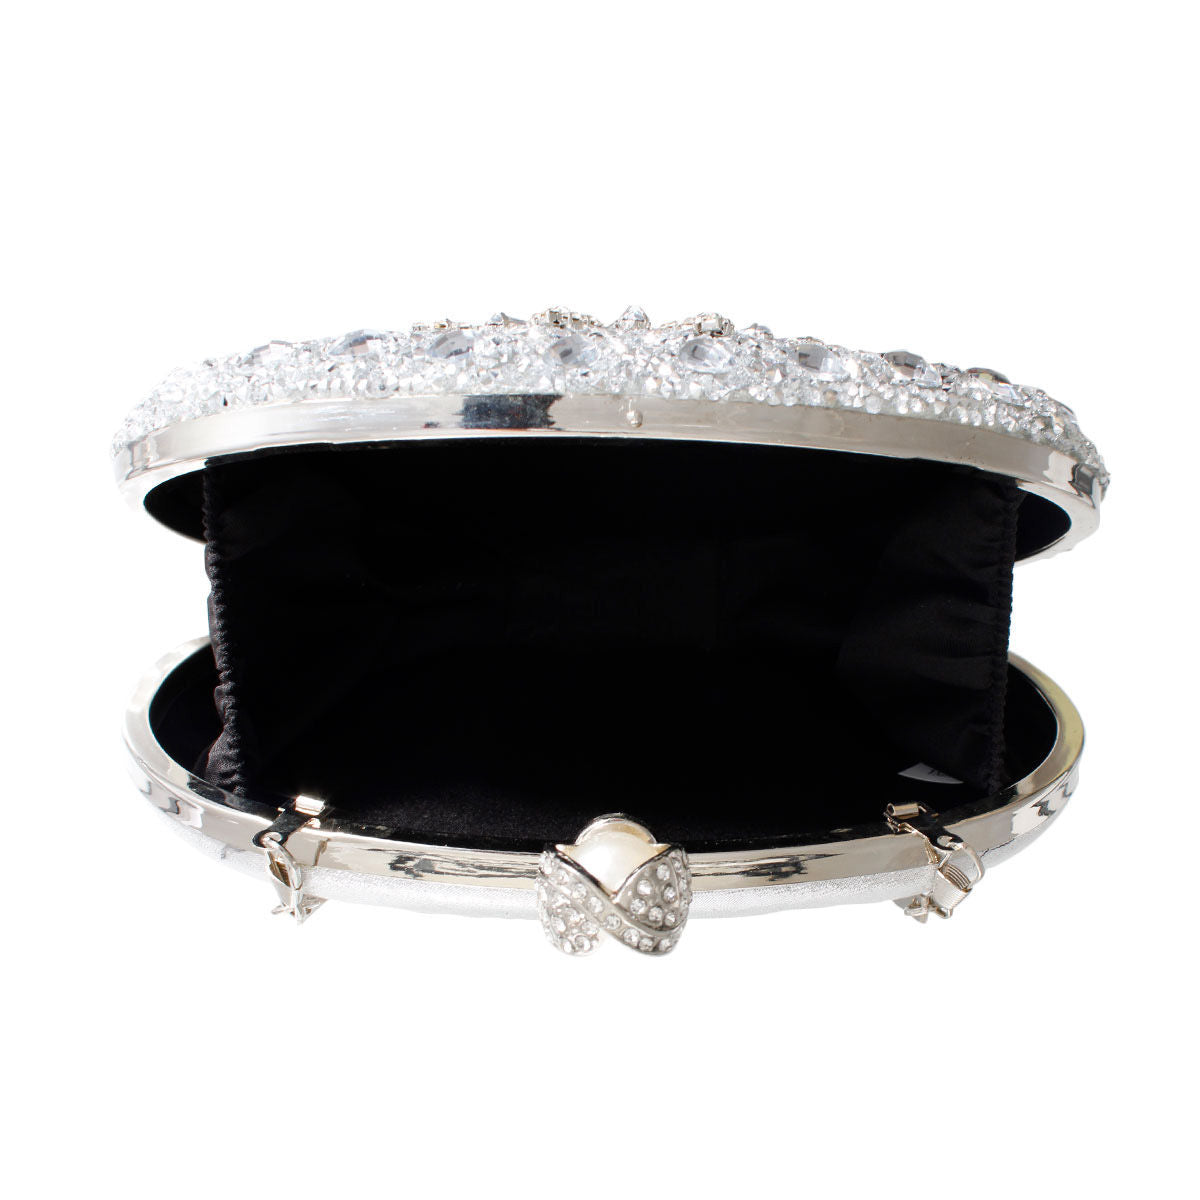 Clutch Silver Crystal Pearl Hard Case for Women